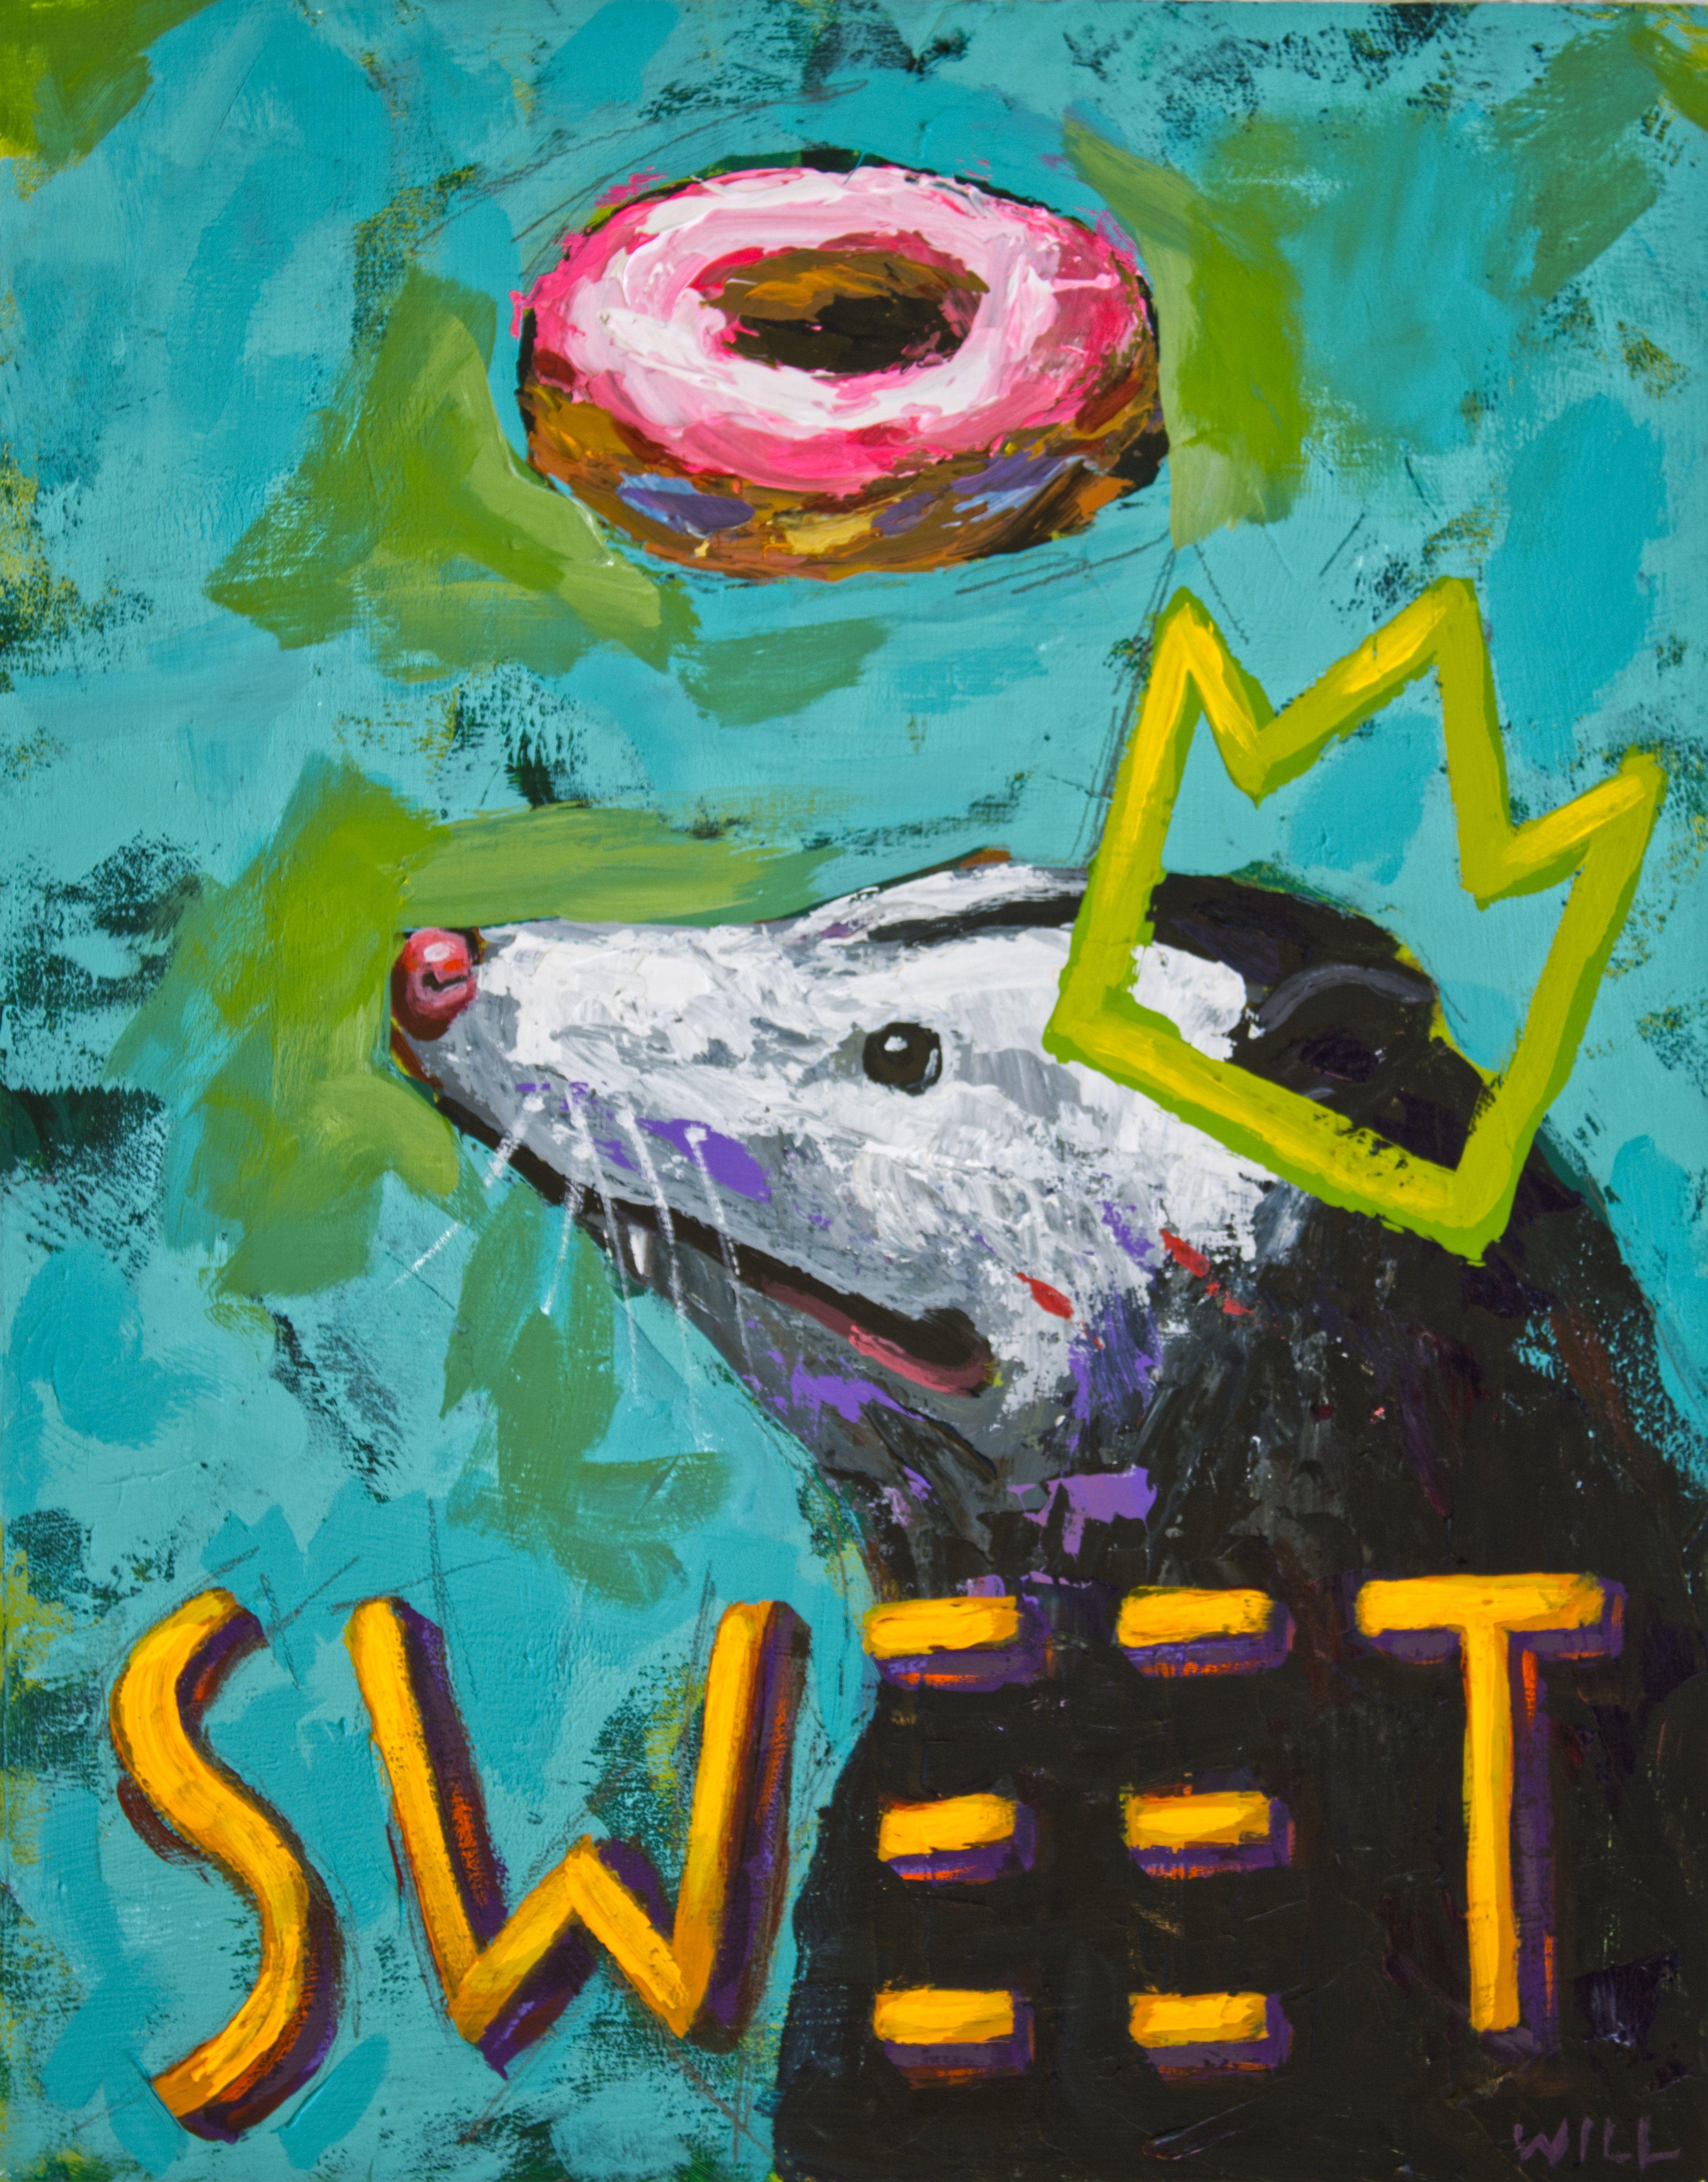 These works are a celebration of the outcasts. Bats, snakes, raccoons, and others are presented in humorous settings that gently lift the fear and stigma imposed on them. Bright and bold colors over lay to share the gamut of positive energy flowing.